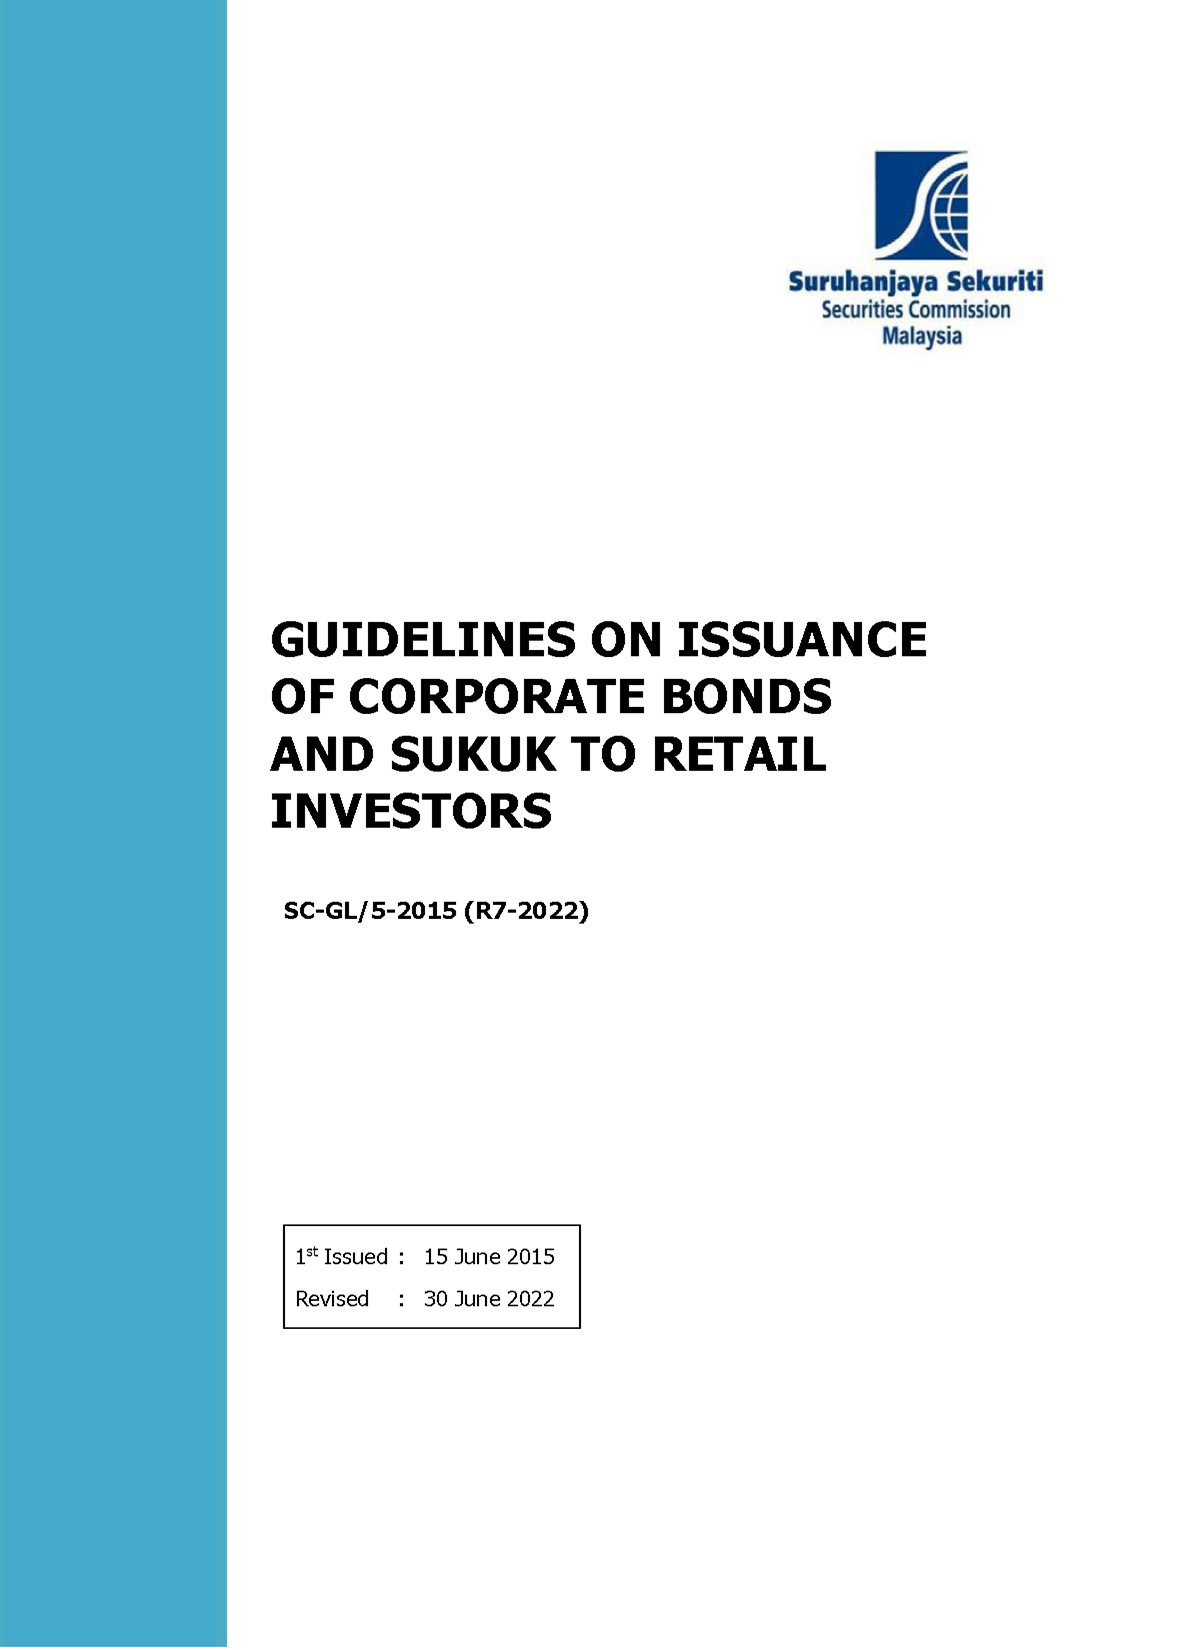 For Issuance Of Corporate Bonds And Sukuk To Retail Investors